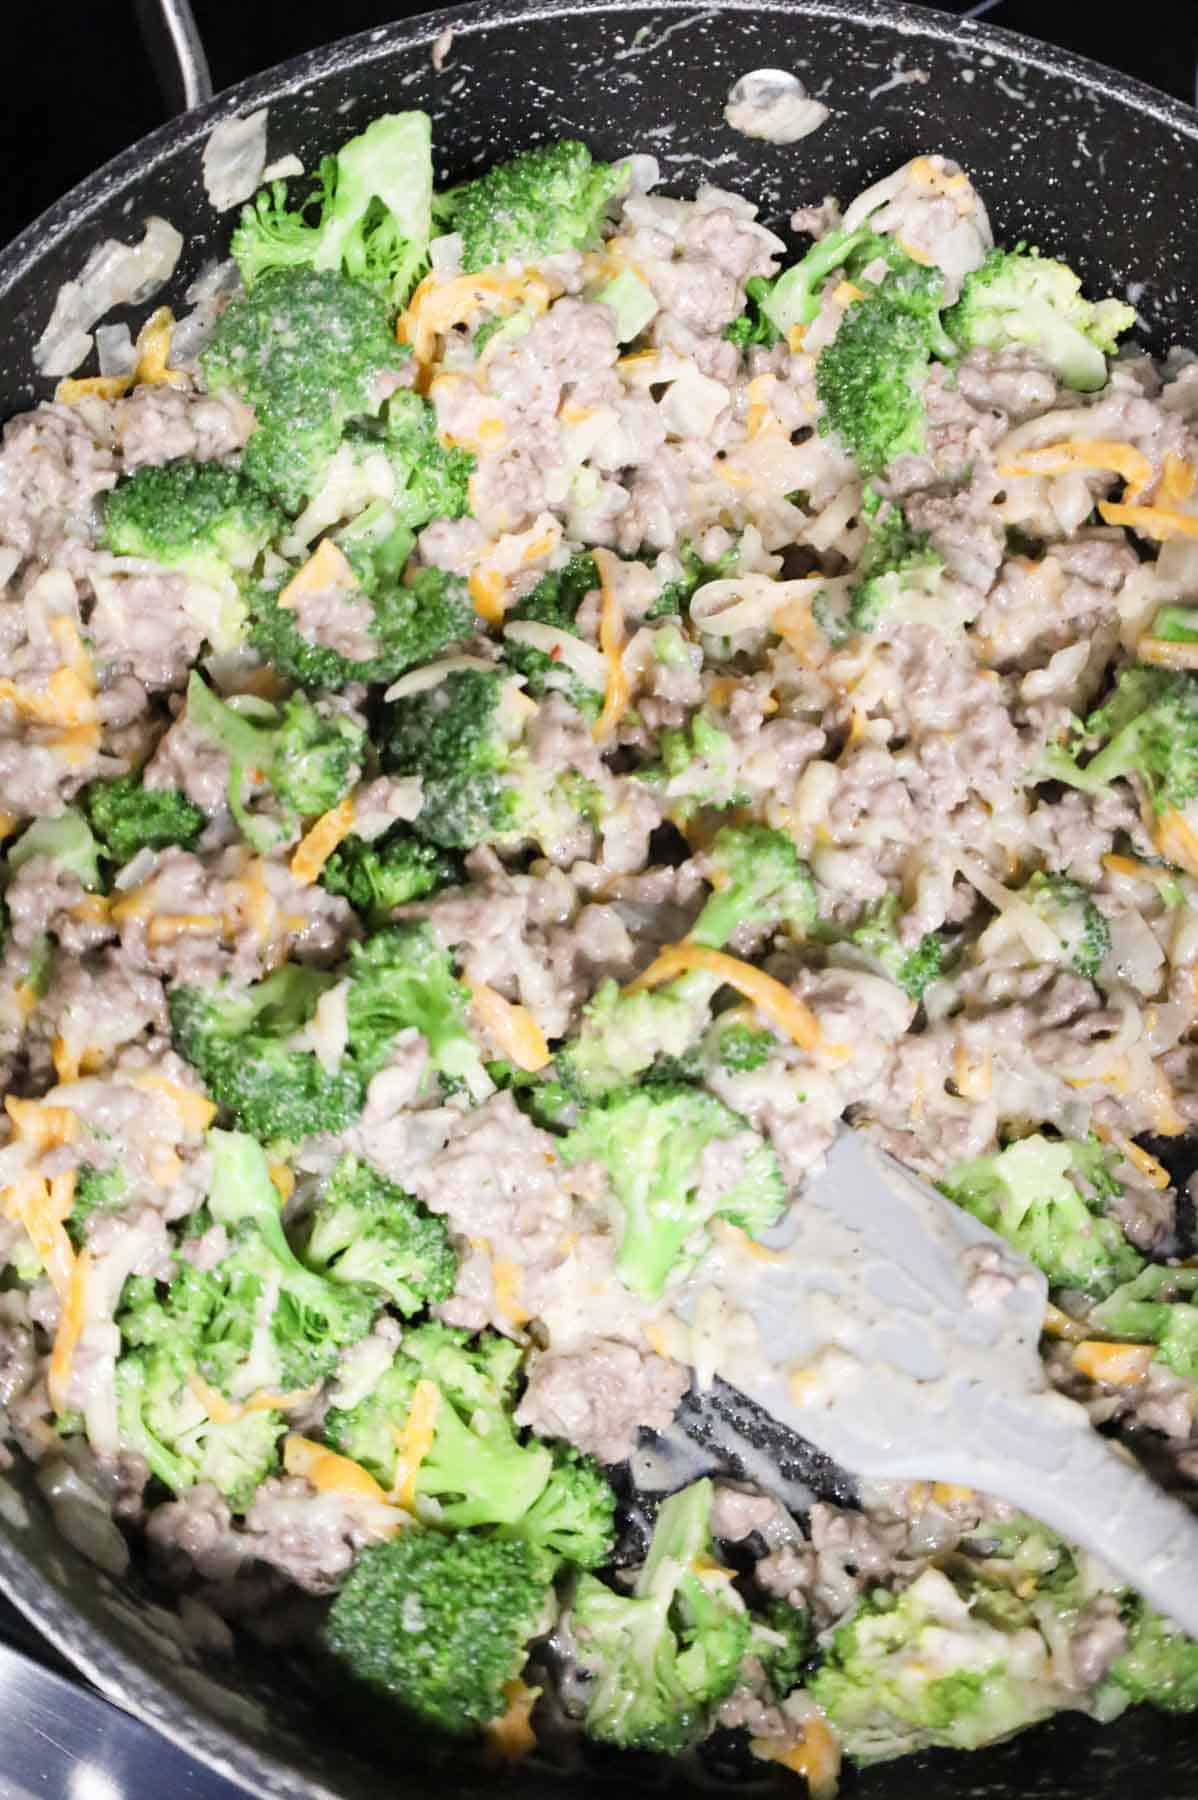 broccoli, shredded cheese and ground beef mixture being stirred in a skillet